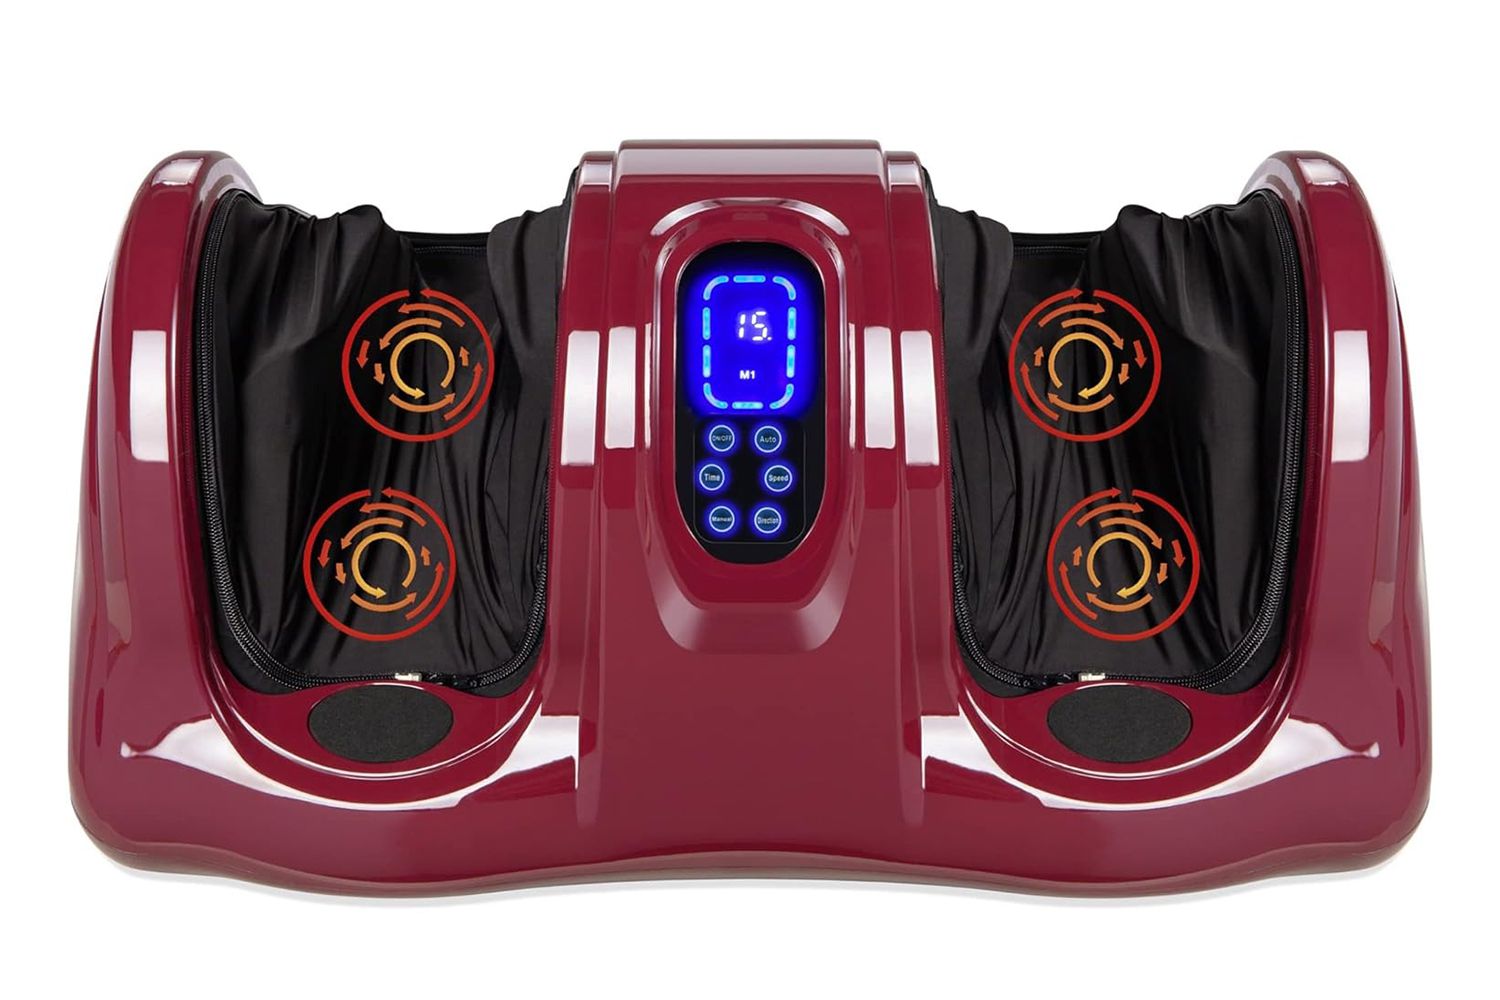 Amazon Best Choice Products Foot Massager Machine Shiatsu Foot Massager, Therapeutic Reflexology Kneading and Rolling for Feet, Ankle, High Intensity Rollers, Remote, Control, LCD Screen - Burgundy